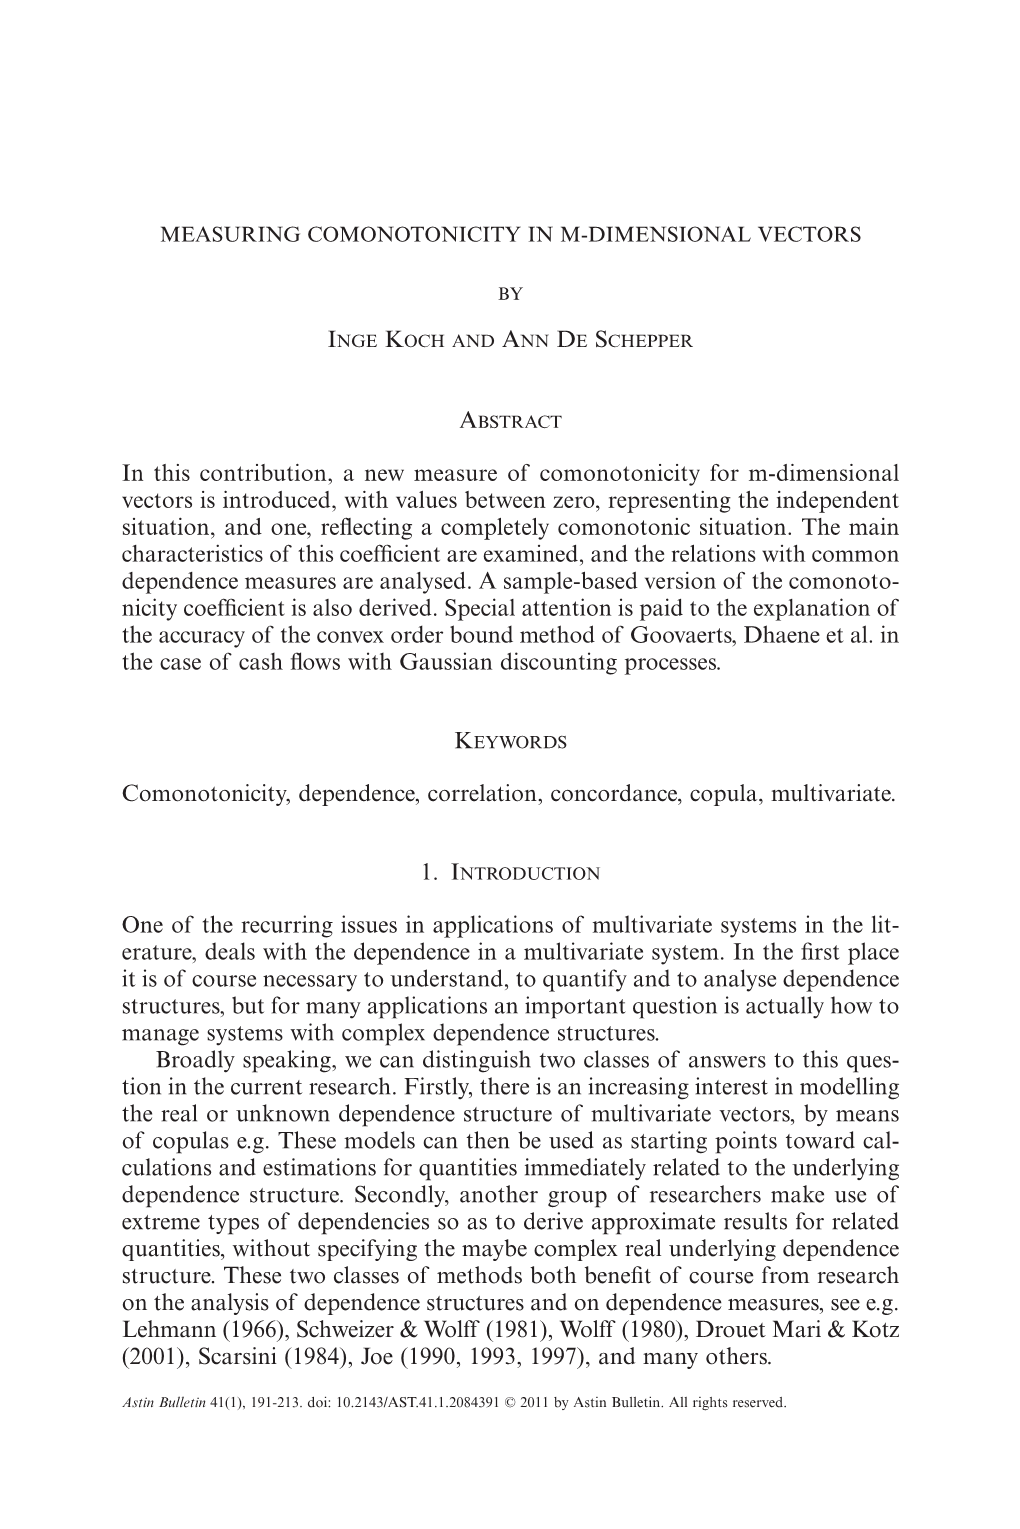 In This Contribution, a New Measure of Comonotonicity for M-Dimensional